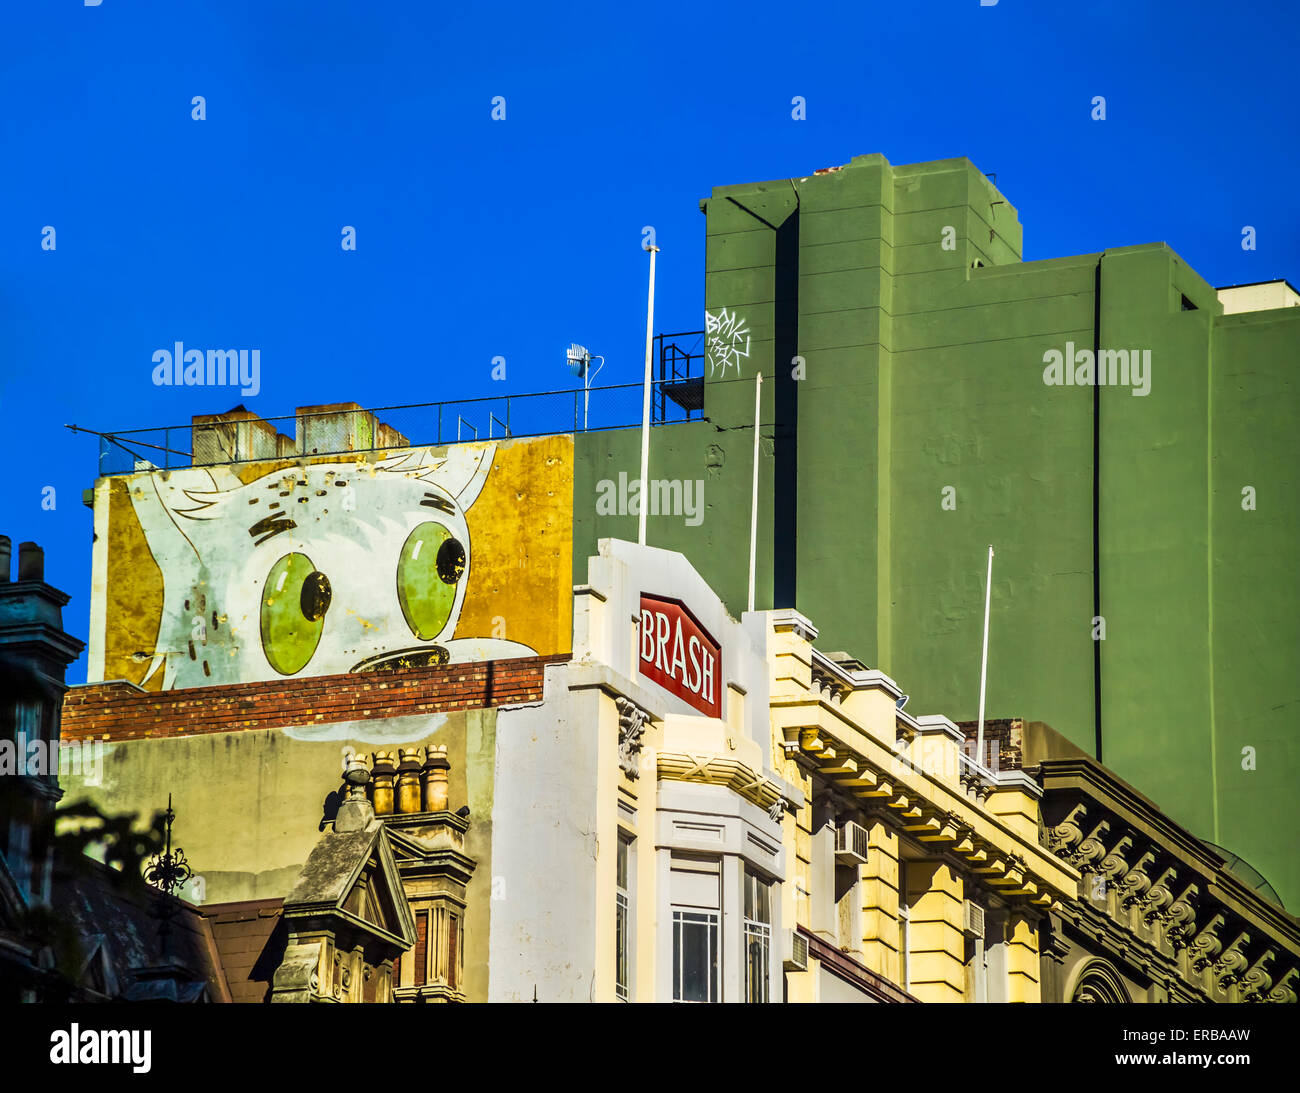 Large mural of cartoon fish on side of colourful green and yellow period architecture in Elizabeth Street Melbourne Australia Stock Photo